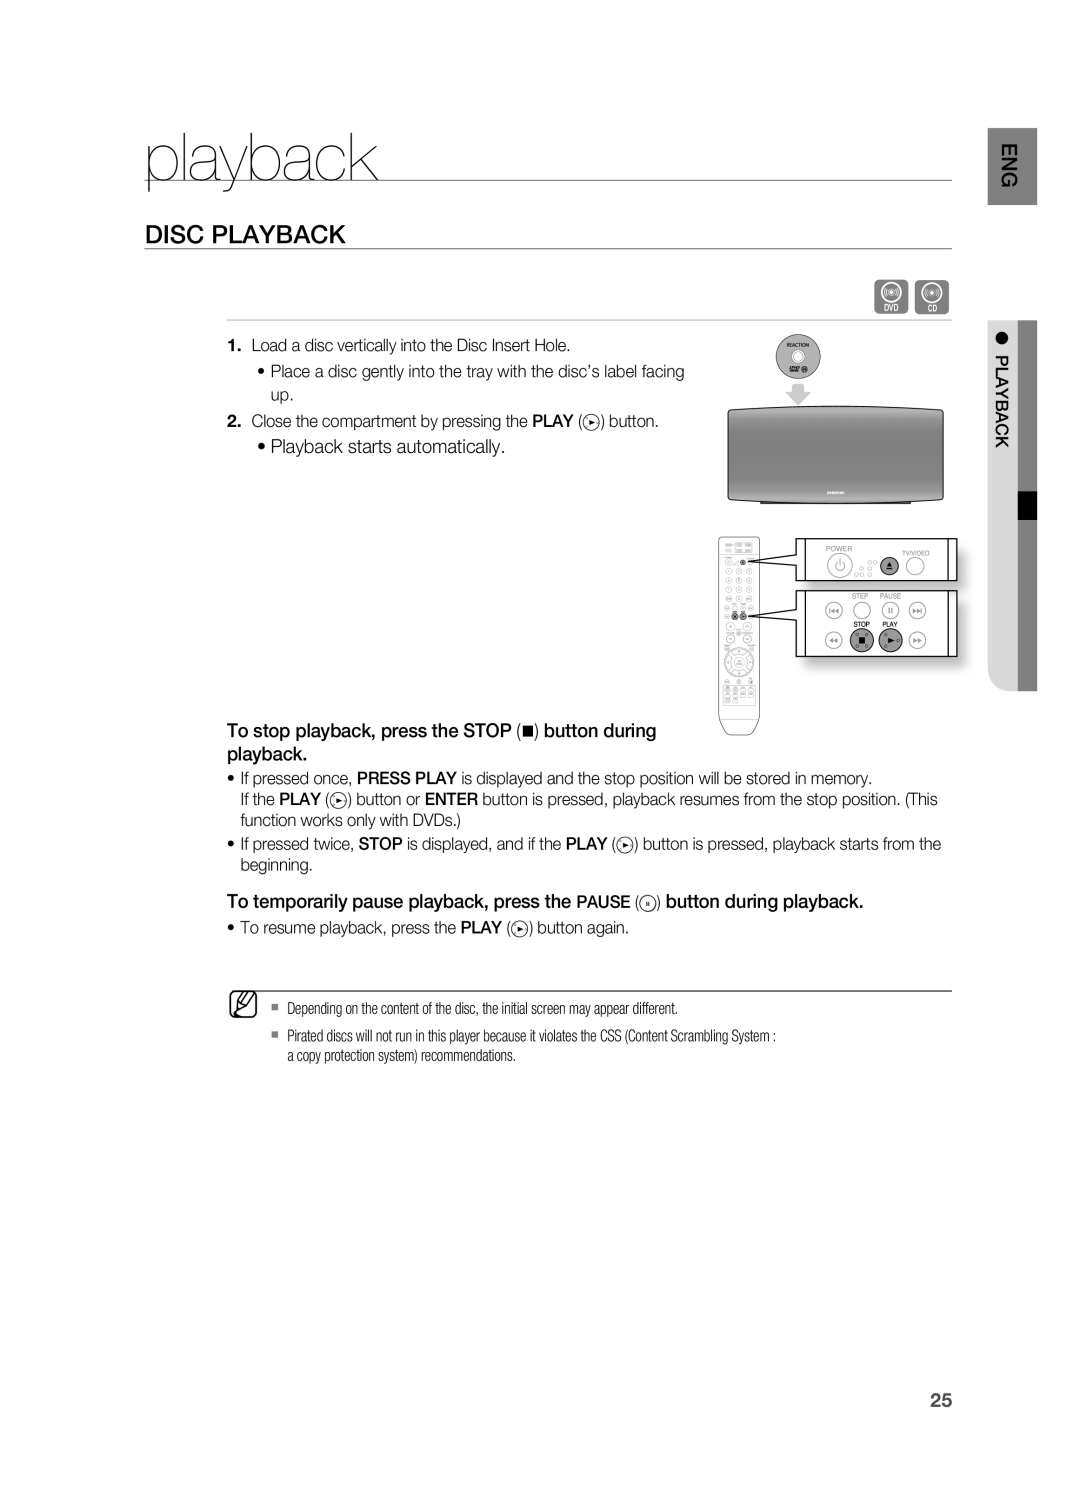 Samsung HT-A100 user manual playback, DISC PlAYBACK 